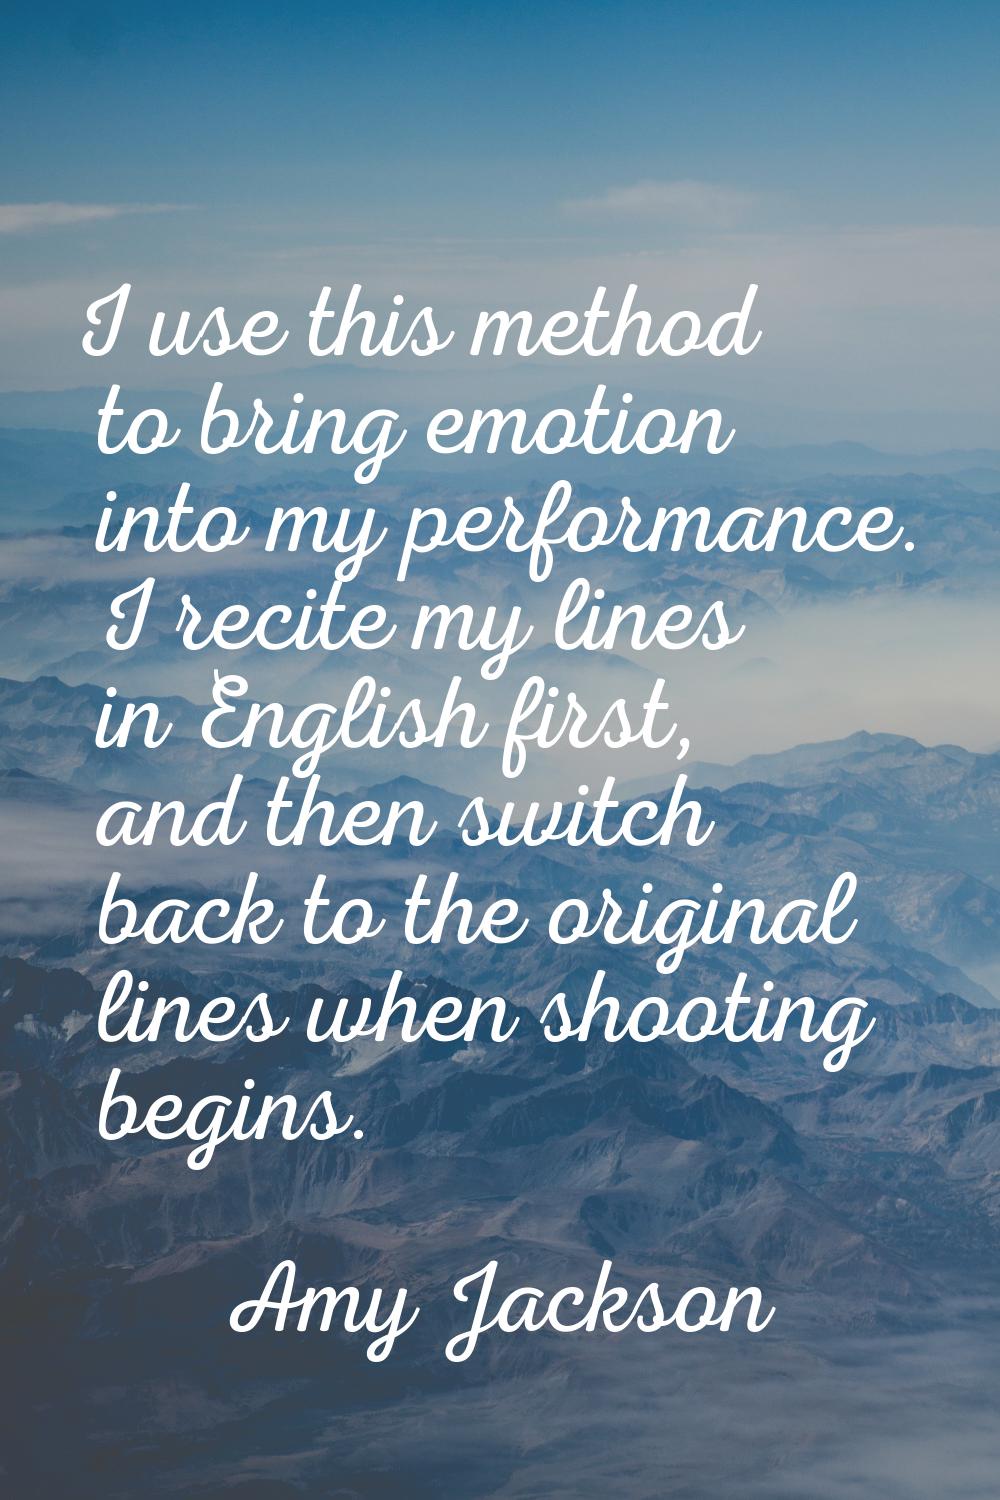 I use this method to bring emotion into my performance. I recite my lines in English first, and the